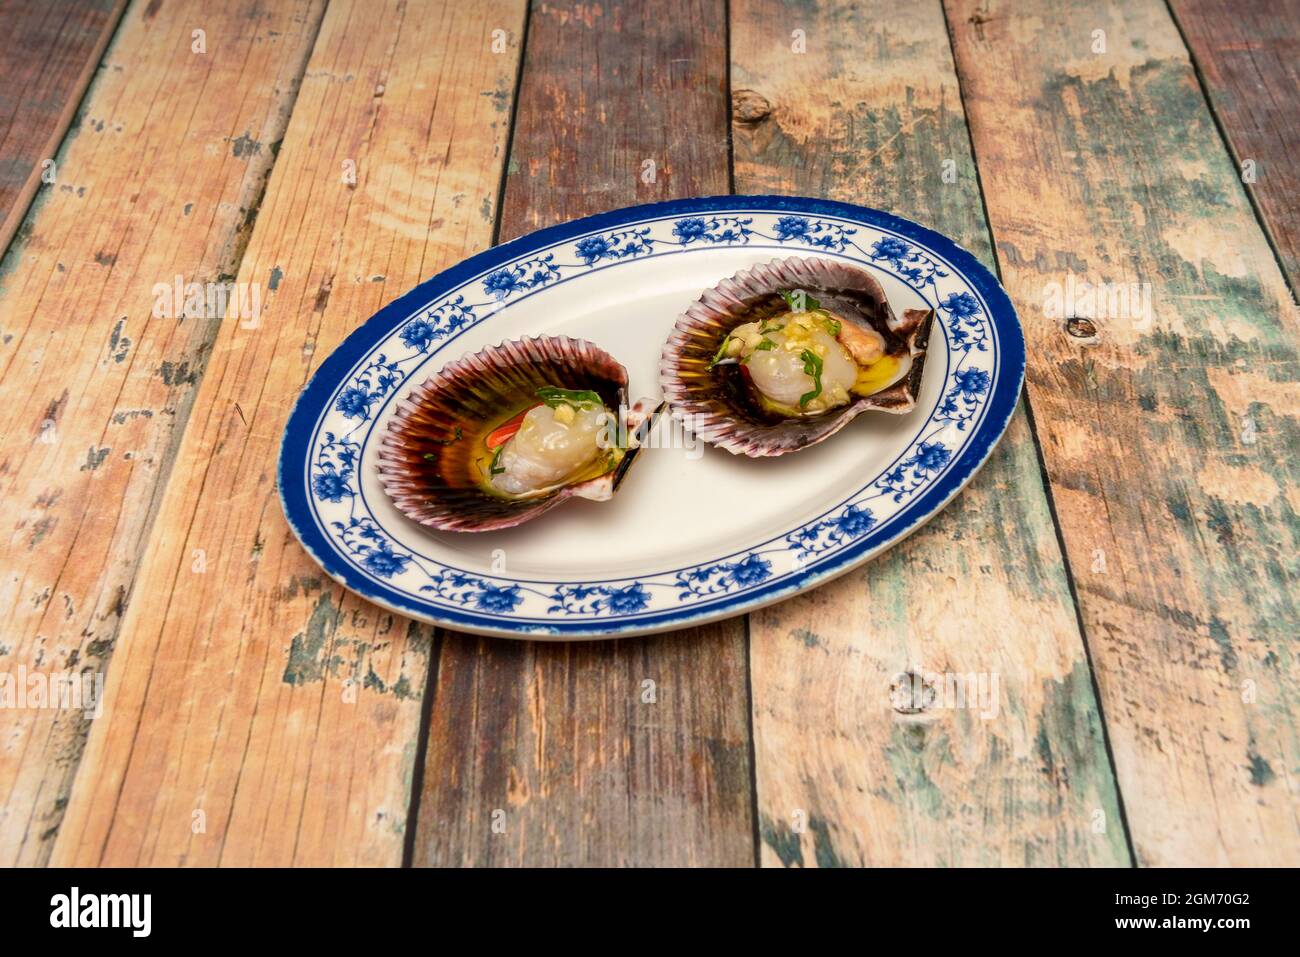 White tray with blue border with two scallops with their shells cooked with a typical Galician recipe. Stock Photo